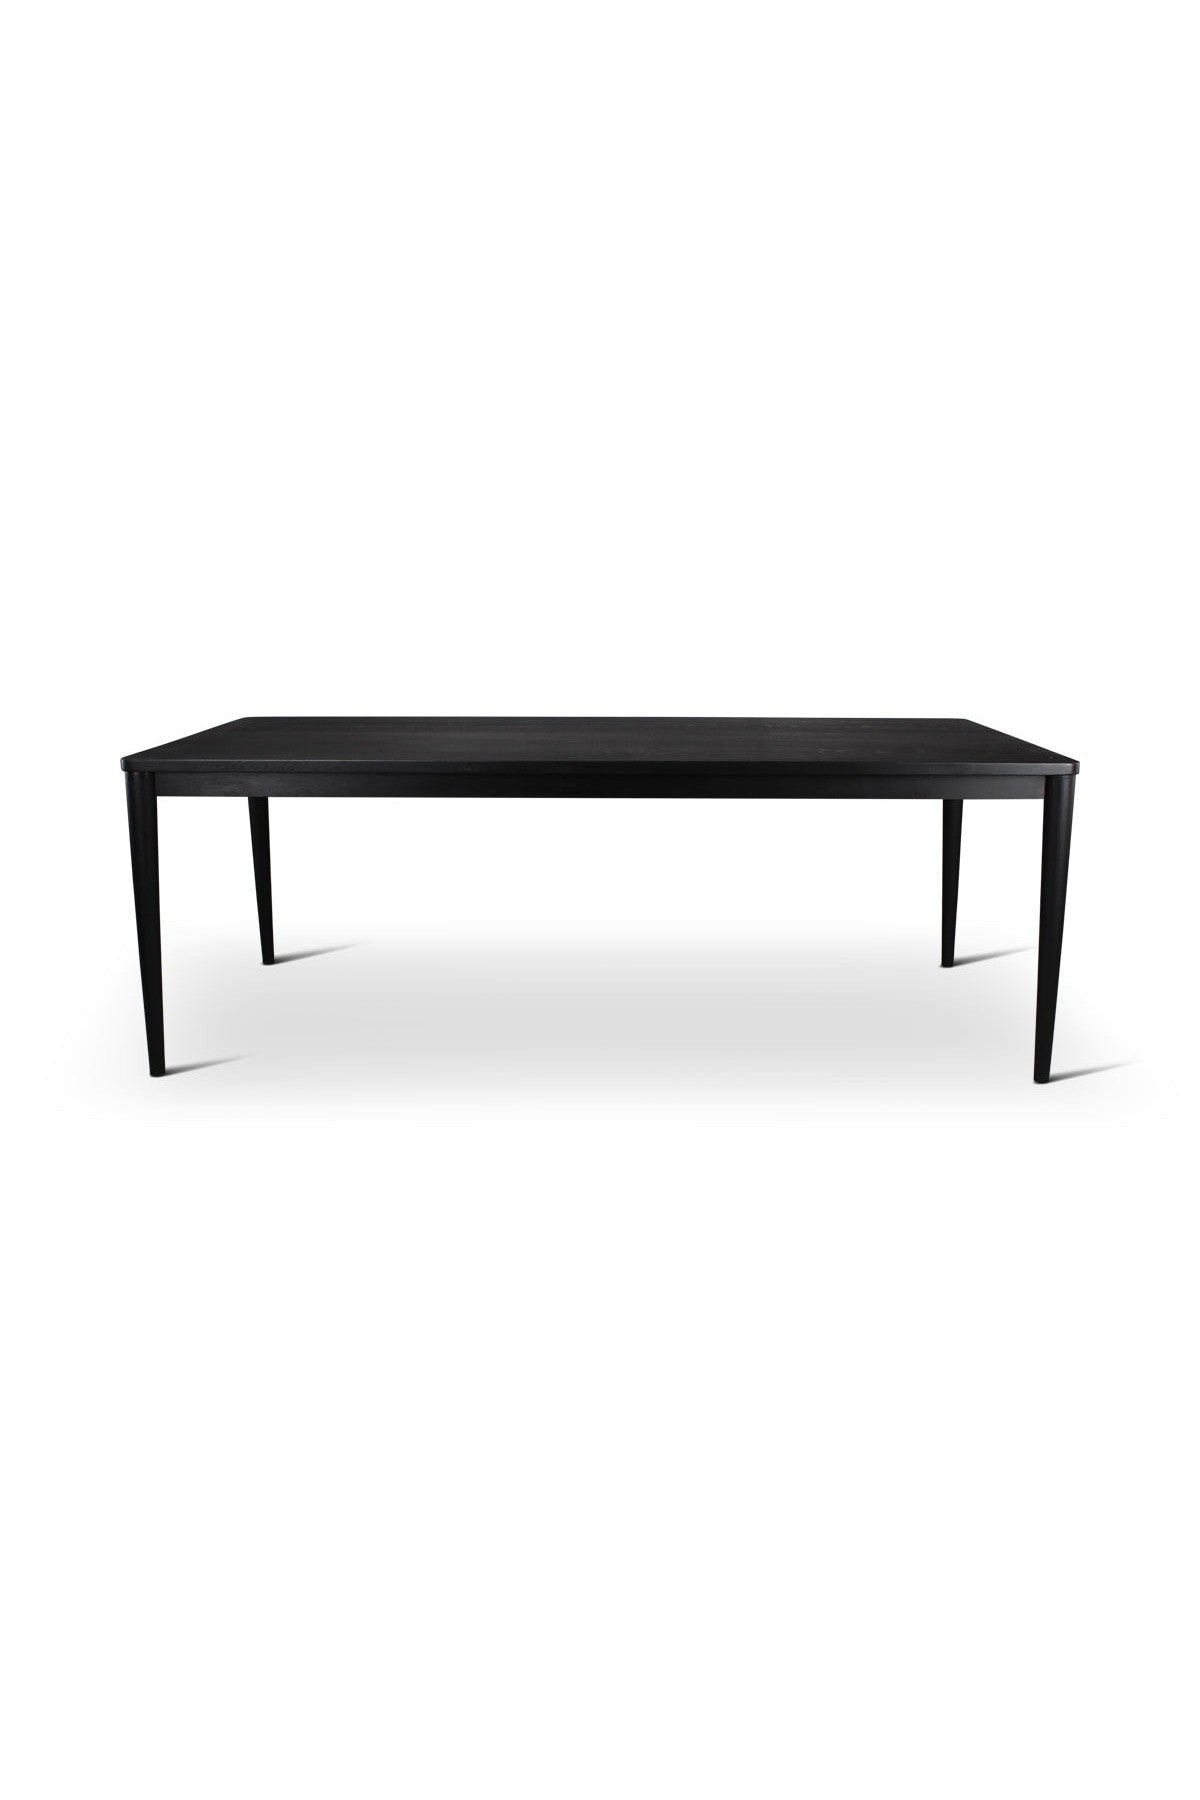 Shenley Outdoor Dining Table - 2 Colors